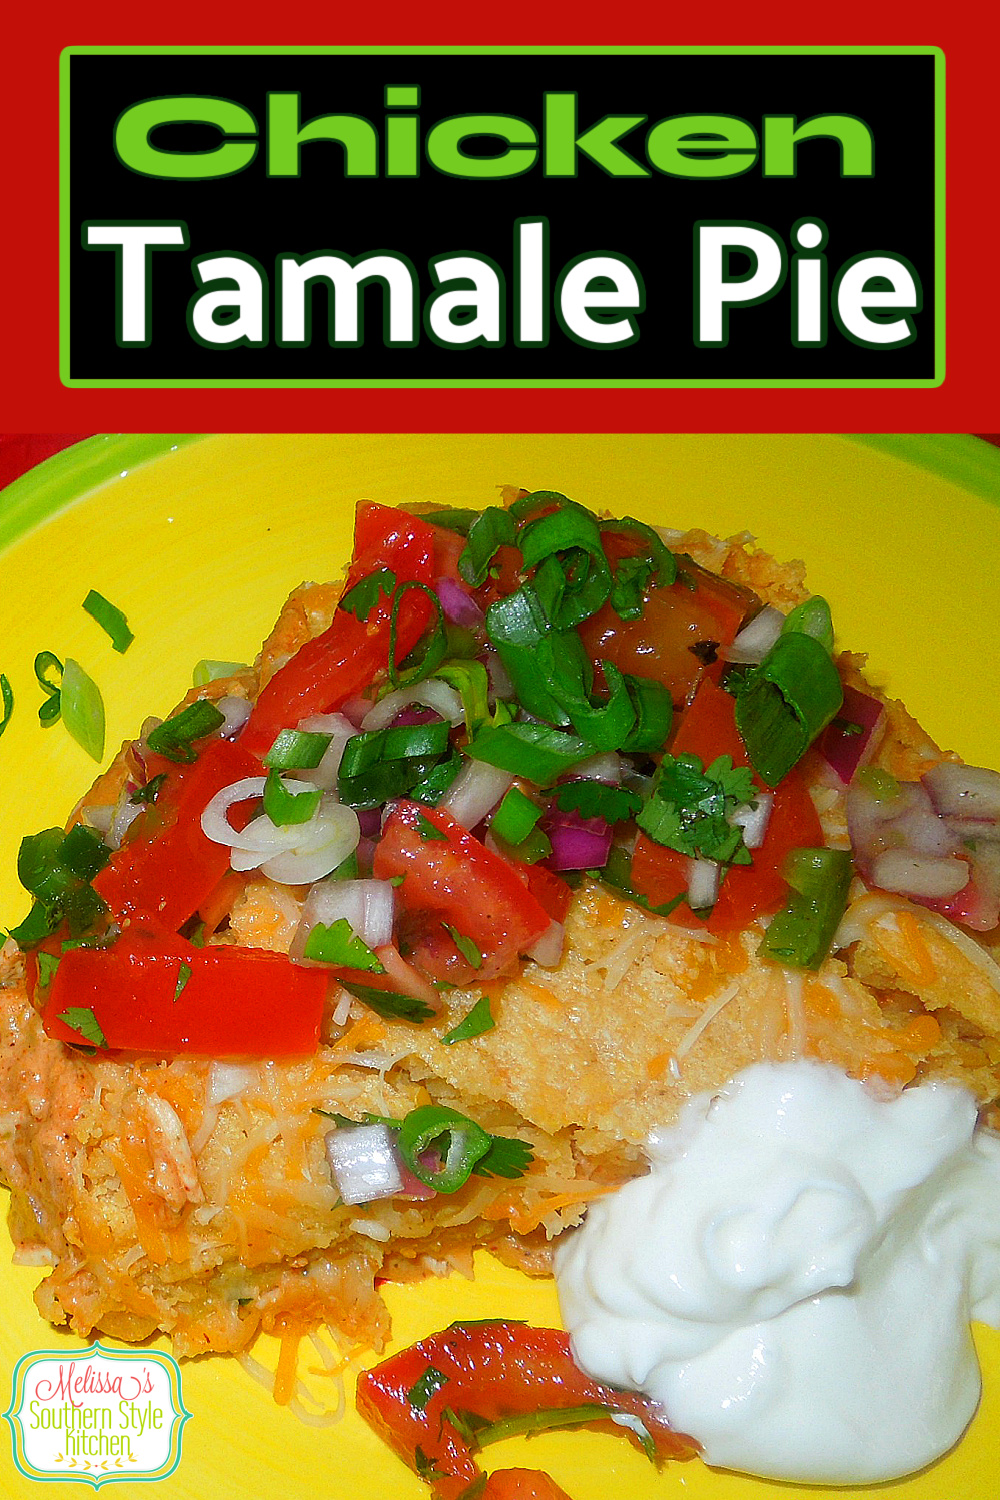 This festive Chicken Tamale Pie is a delicious Mexican inspired dish made with easy to find ingredients! #chickentamales #chickenpie #chickentamalepie #easychickenrecipes #mexicanchicken #chickencasseroles #cornbread #tamales via @melissasssk